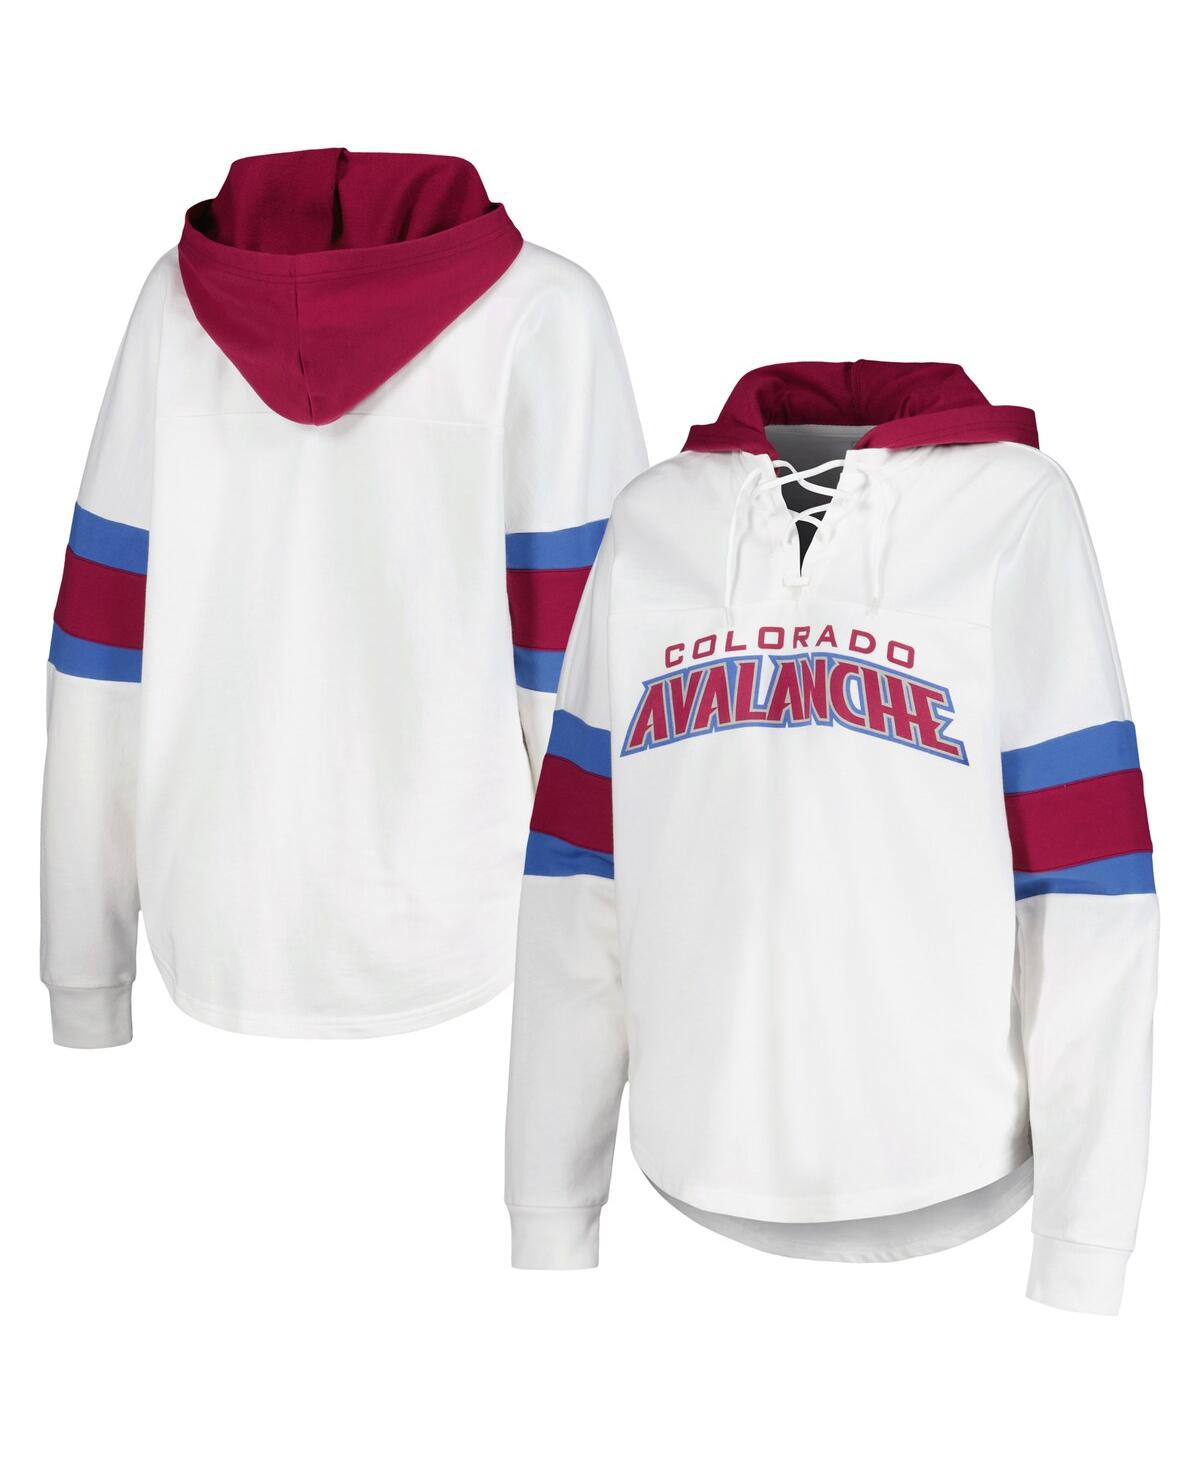 Women's G-iii 4Her by Carl Banks White, Burgundy Colorado Avalanche Goal Zone Long Sleeve Lace-Up Hoodie T-shirt - White, Burgundy